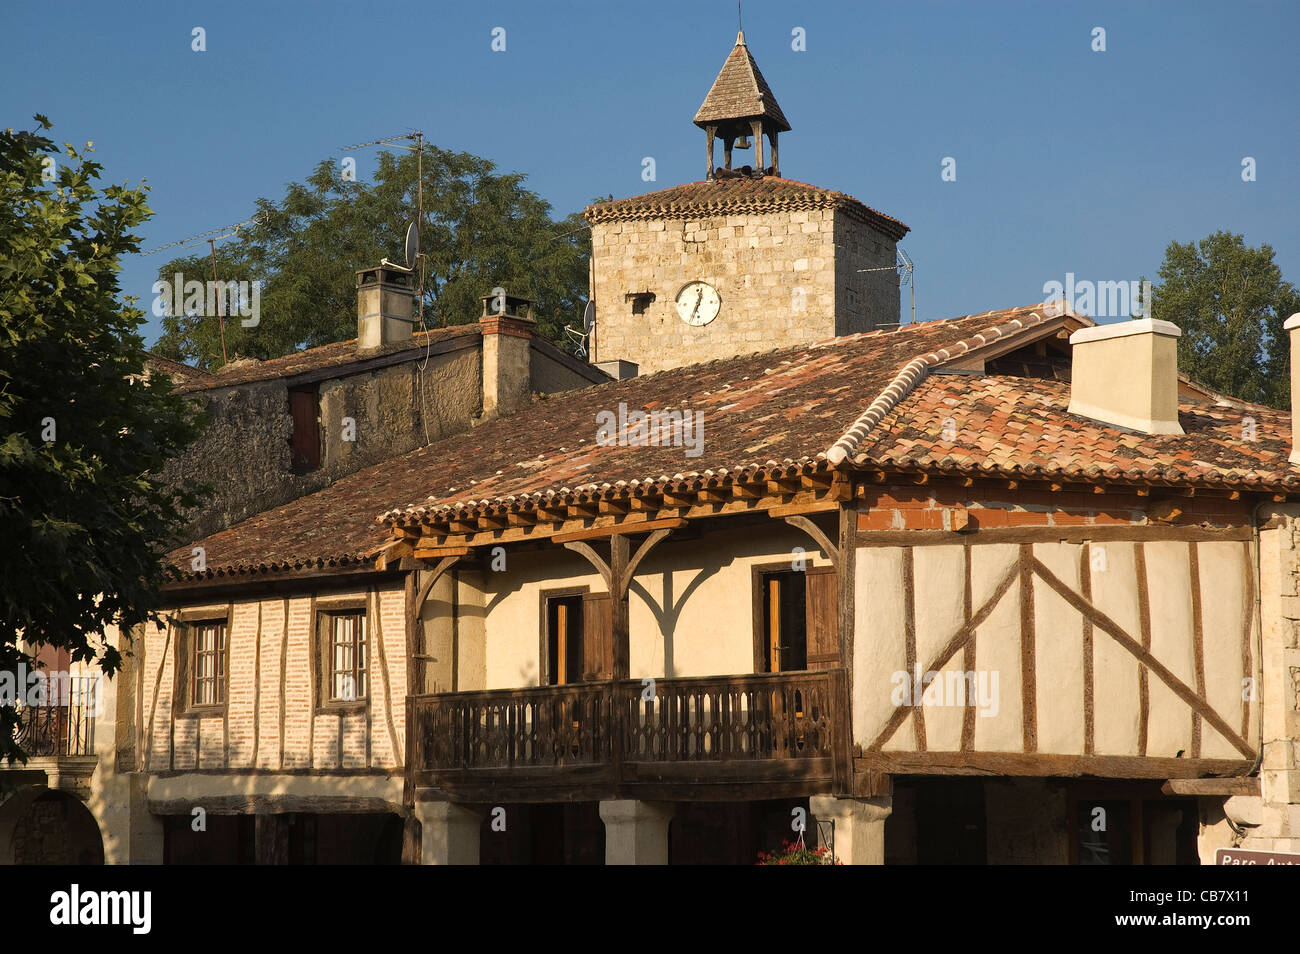 Elk196-1739 France, Aquitaine, Fources, traditional architecture Stock Photo